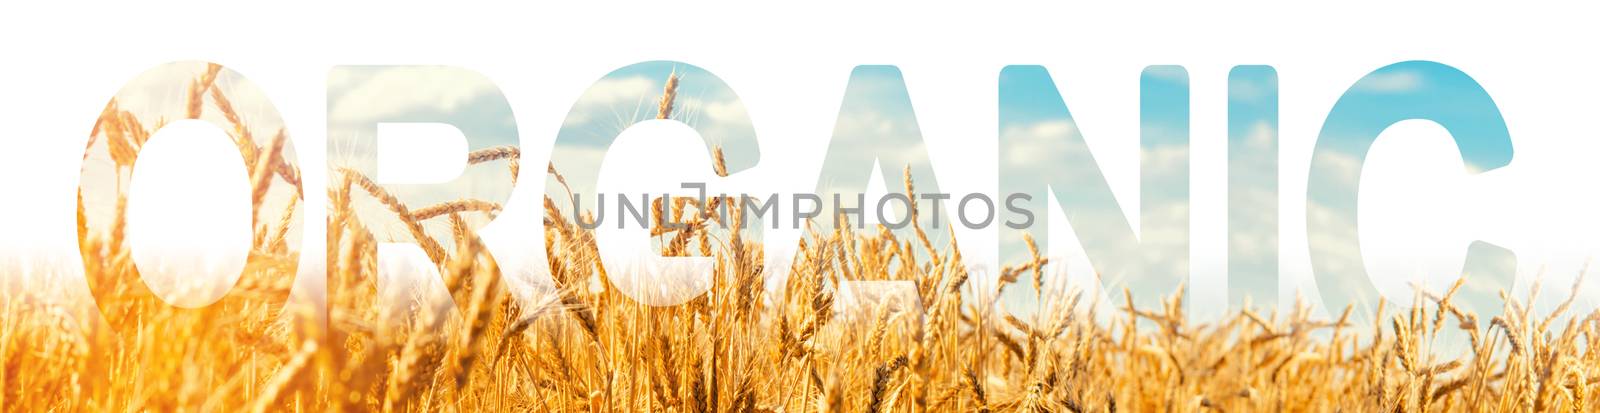 The inscription Organic on the background of a field of wheat plantation. Production of organic agricultural products. Environmentally friendly and safe product without chemicals. by iLixe48